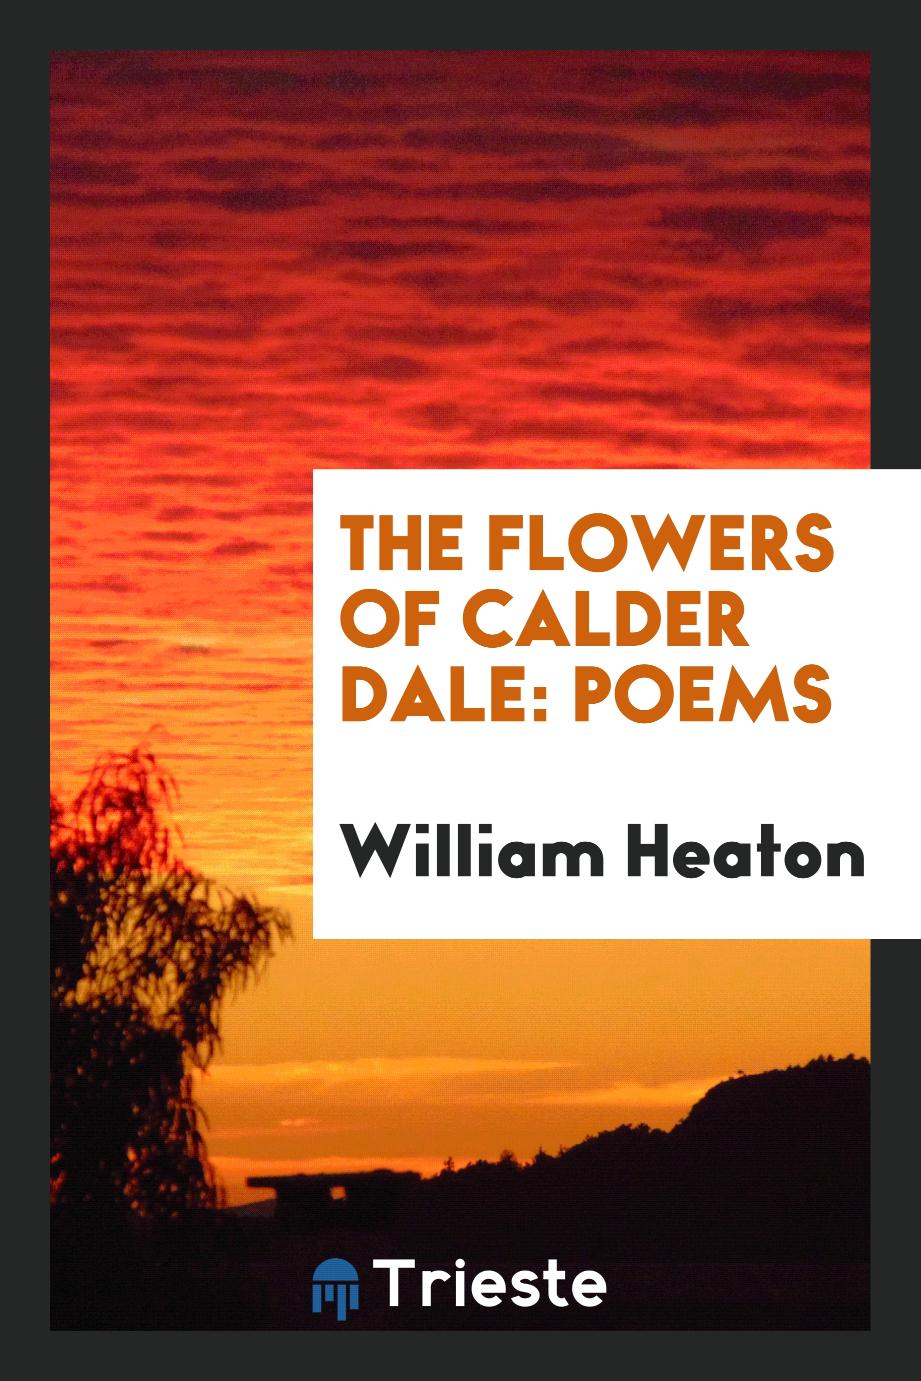 The Flowers of Calder Dale: Poems